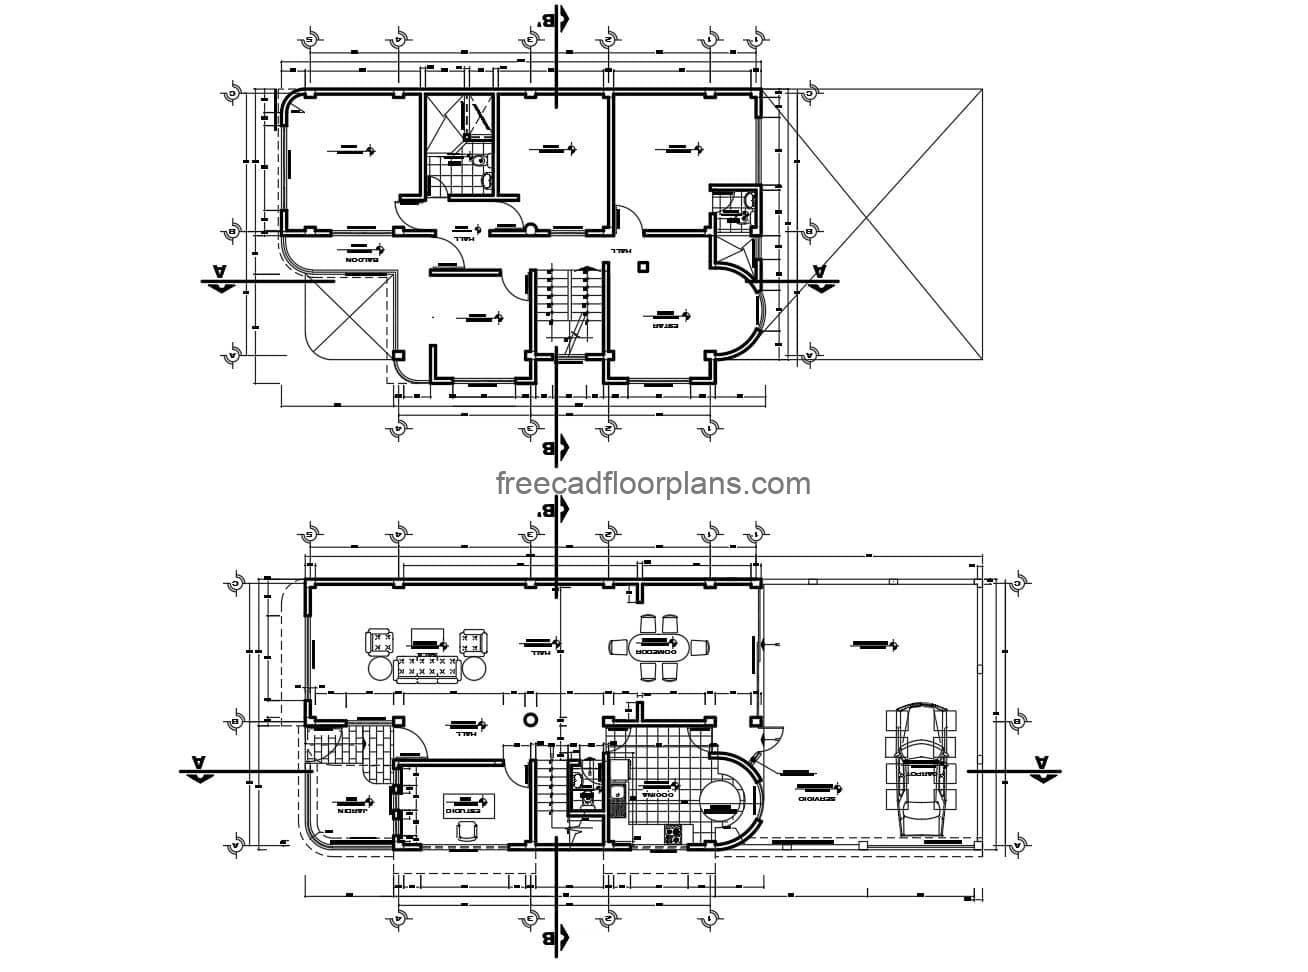 Architectural design and complete plans of two-level residence in autocad for free download.